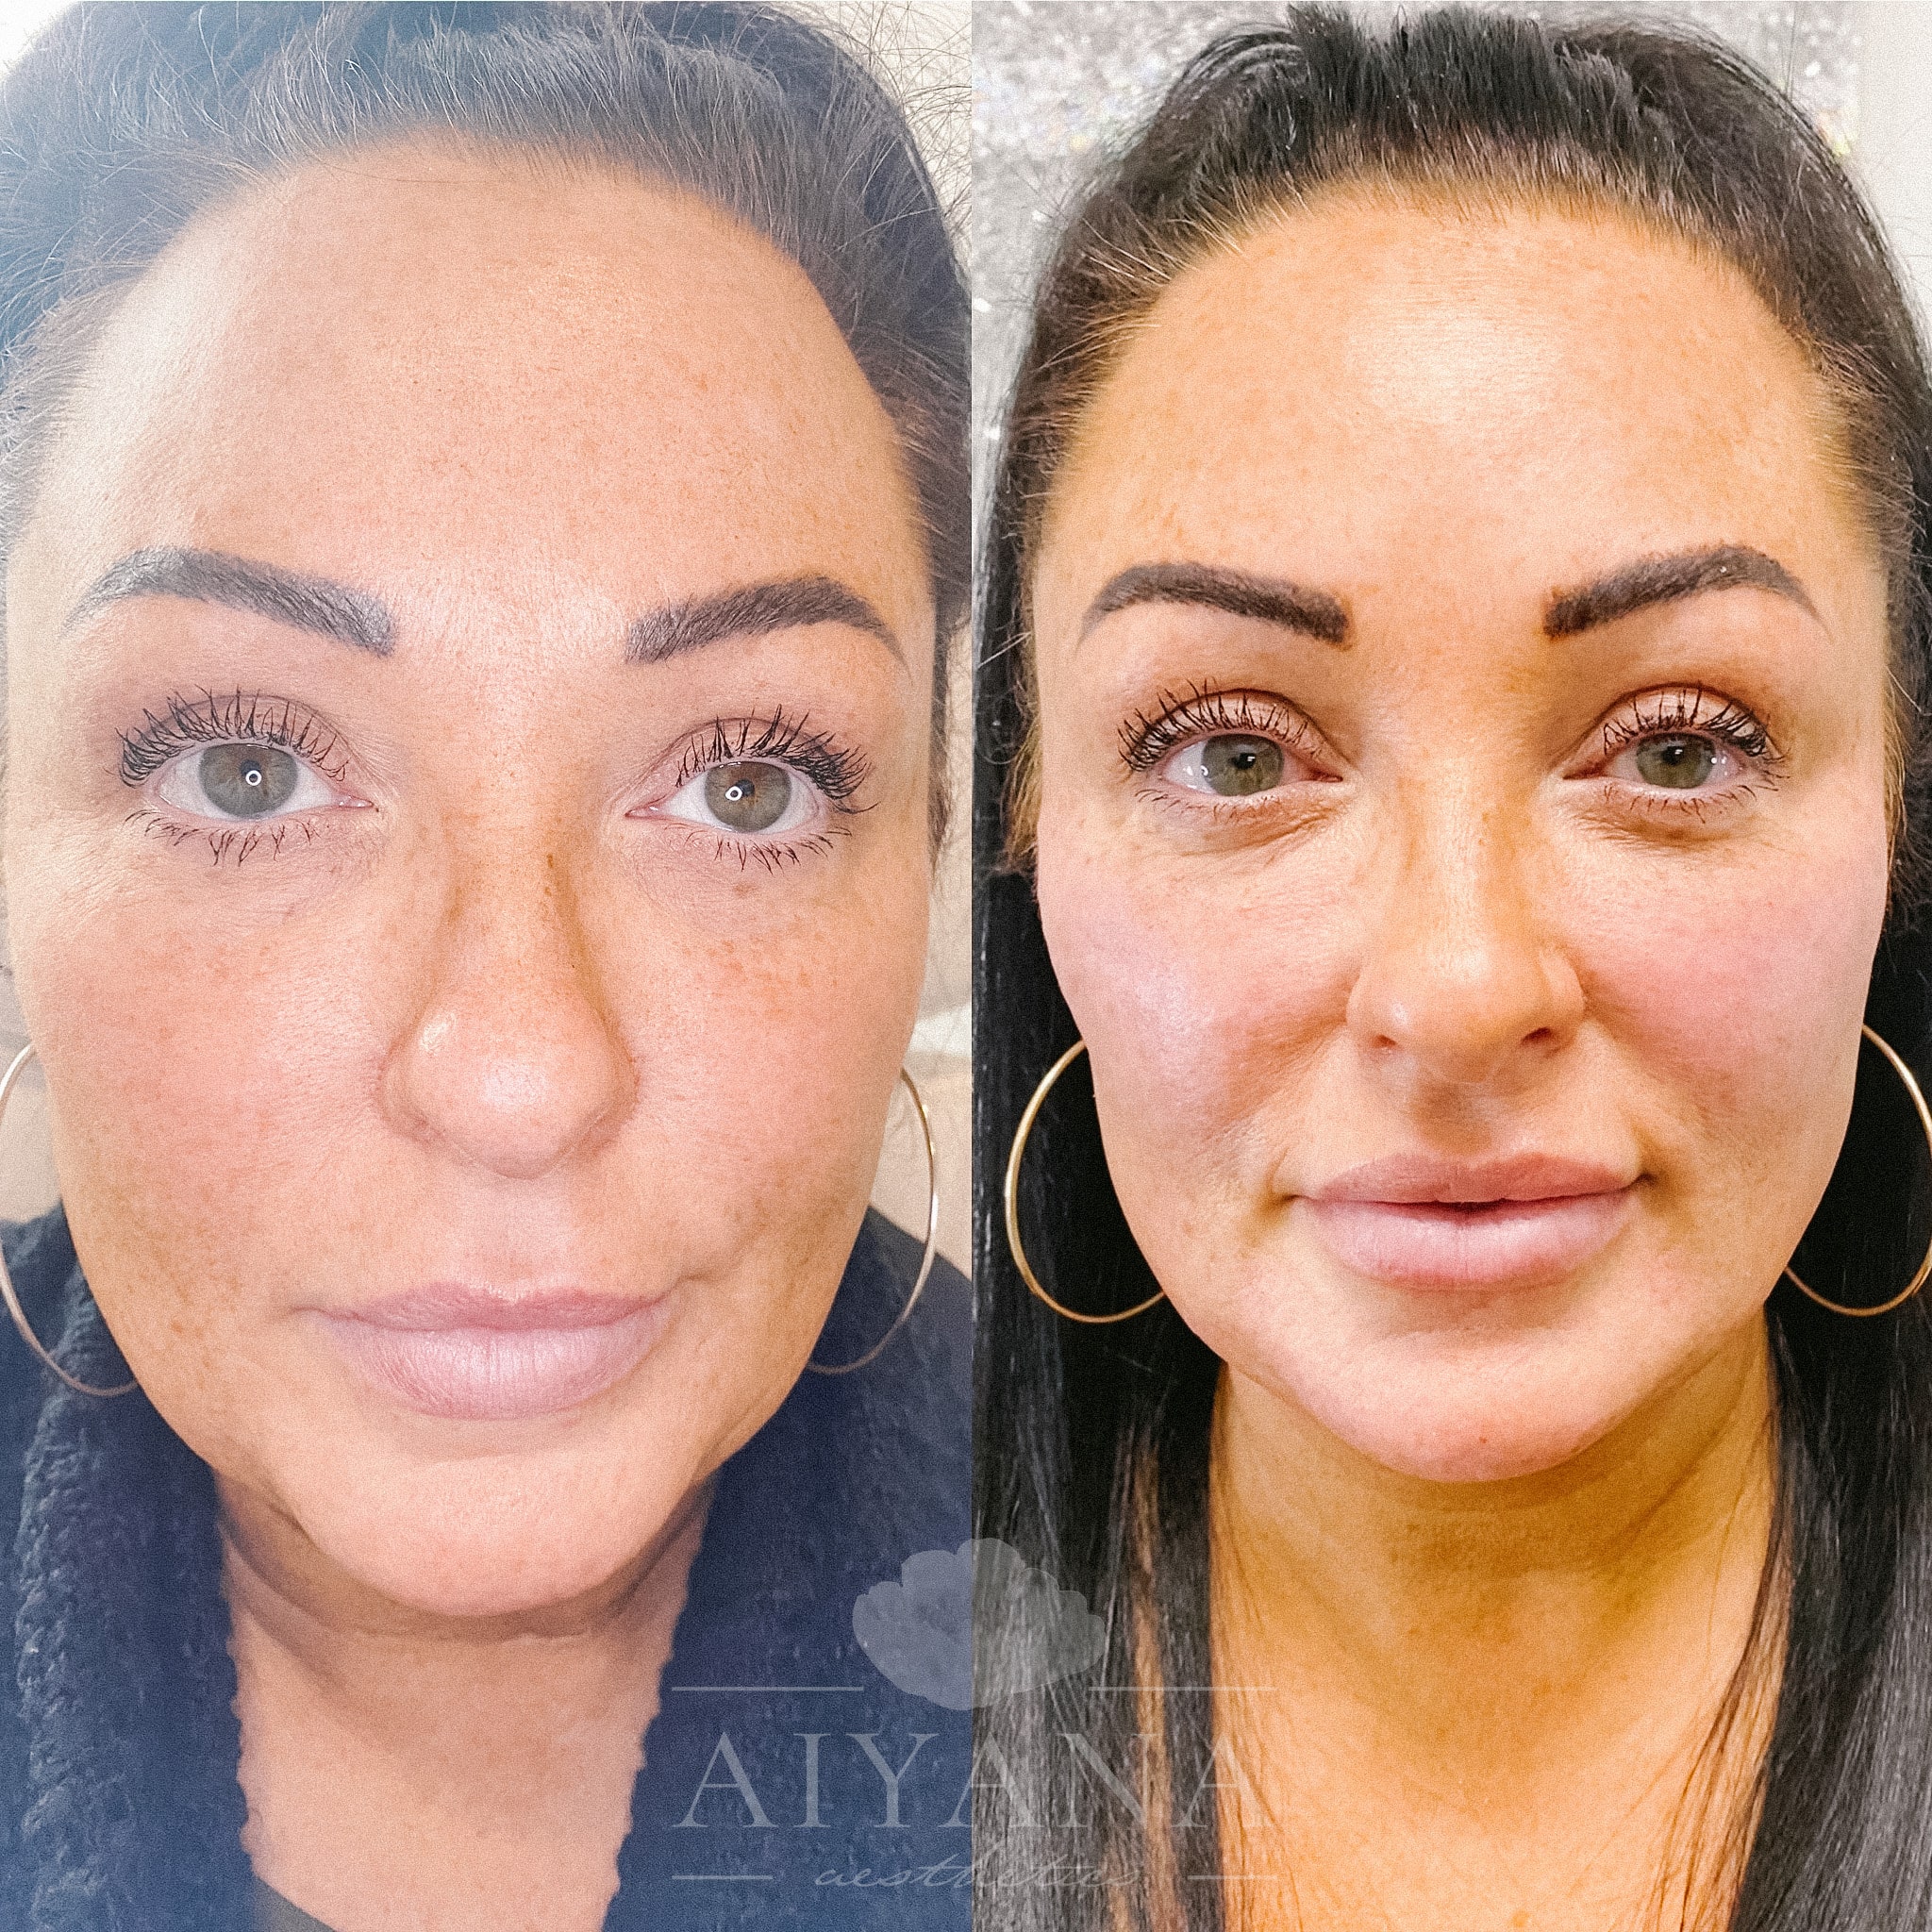 Before & After Gallery | Molalla, OR - Aiyana aesthetics